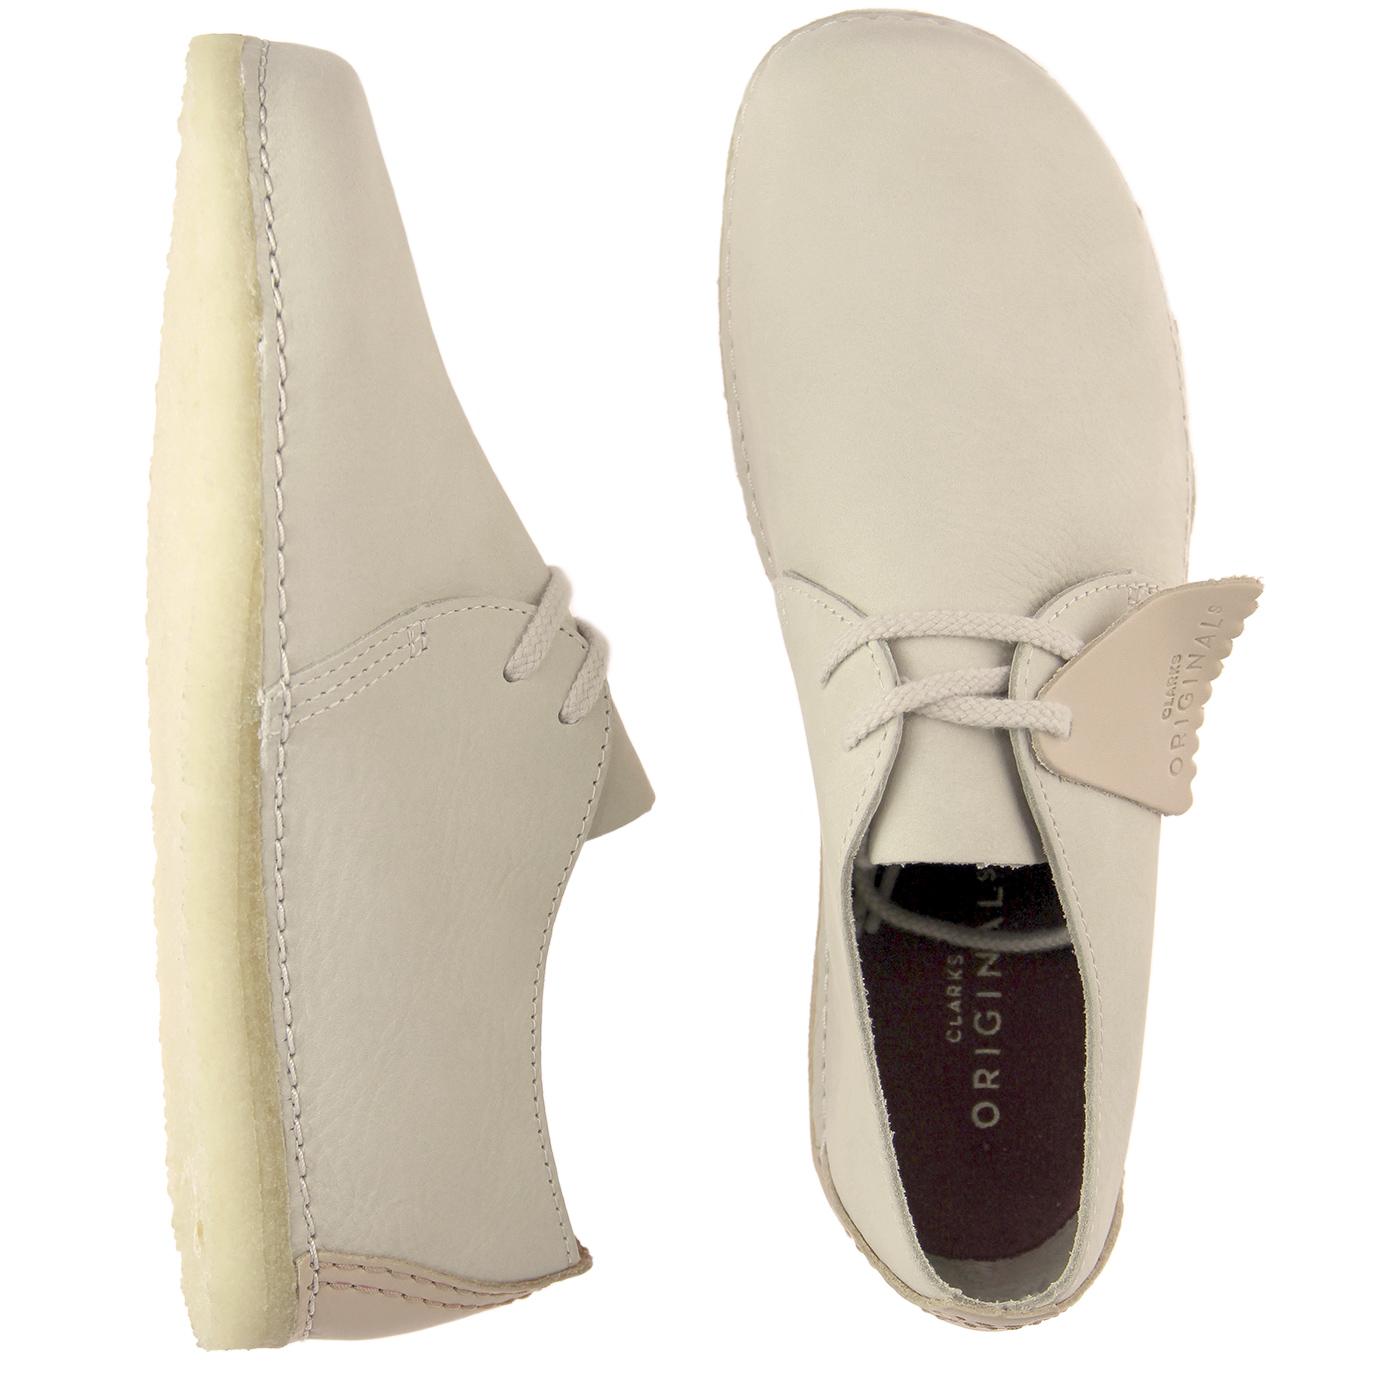 clarks shoes international delivery